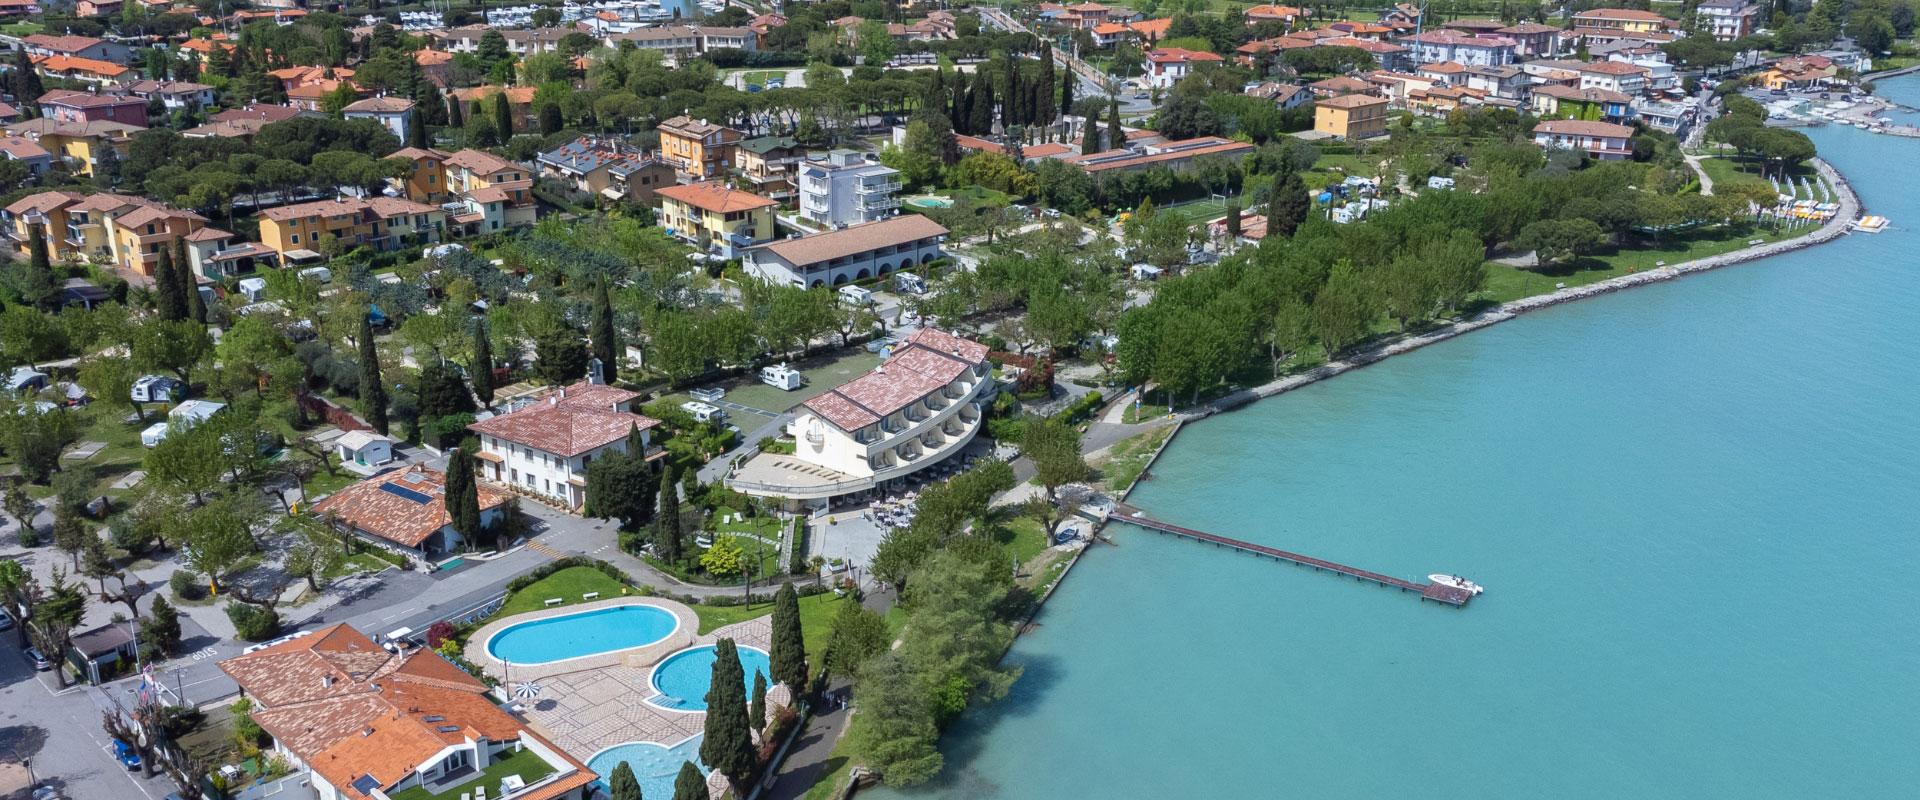 Aerial view of a tourist complex with pool and lake access.